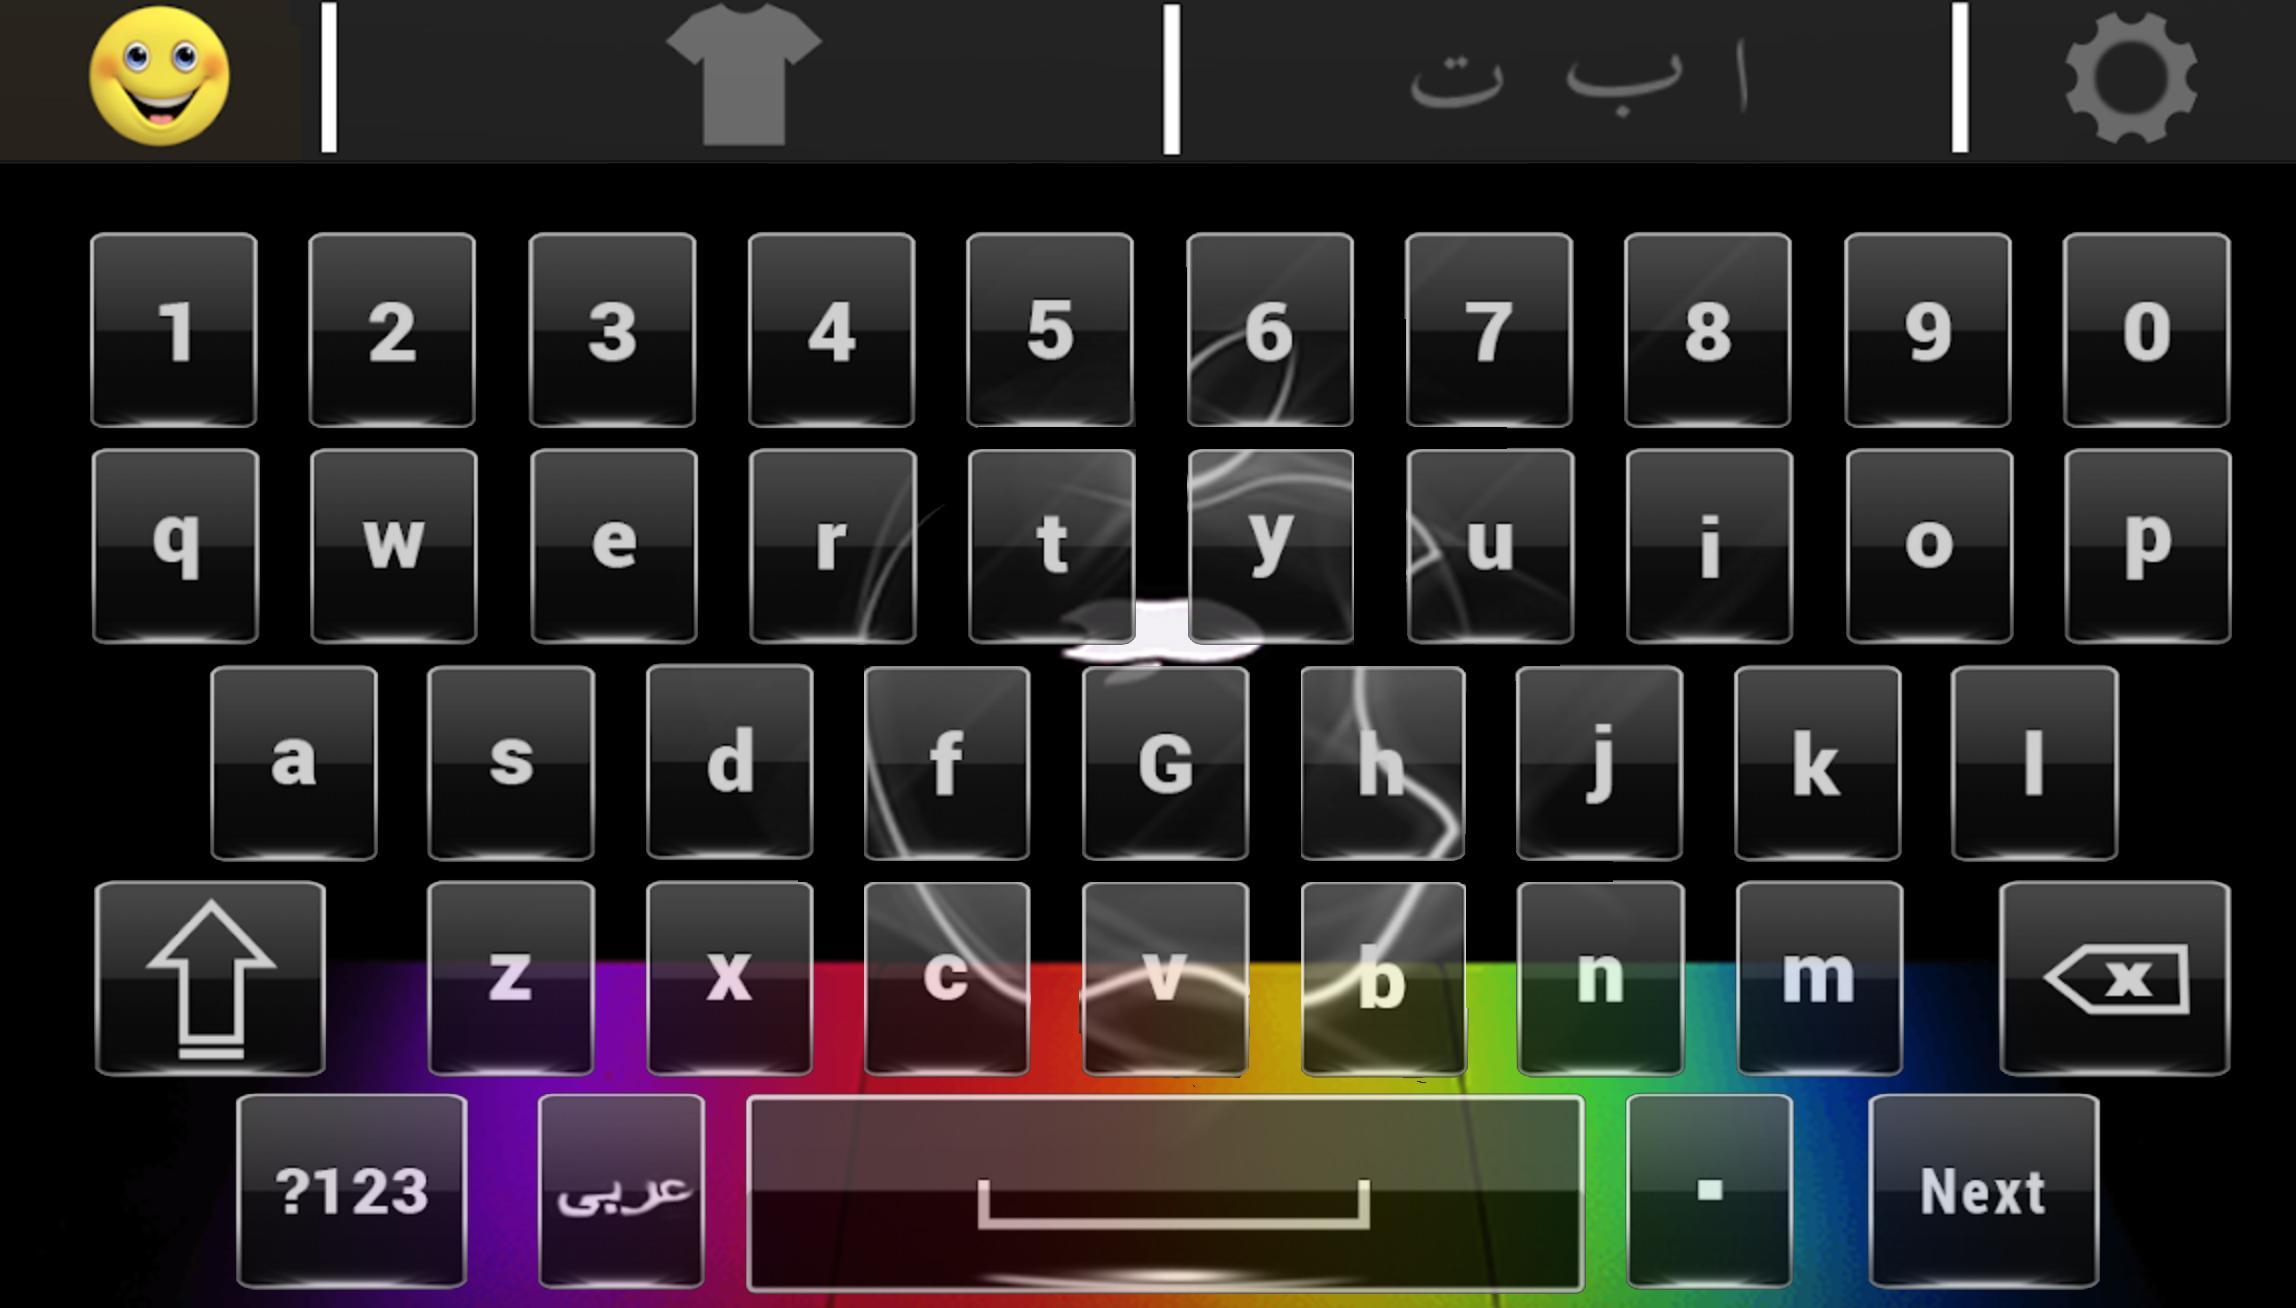 Luxury Arabic keyboard 2019 – Fast Typing Keyboard pour Android -  Téléchargez l'APK